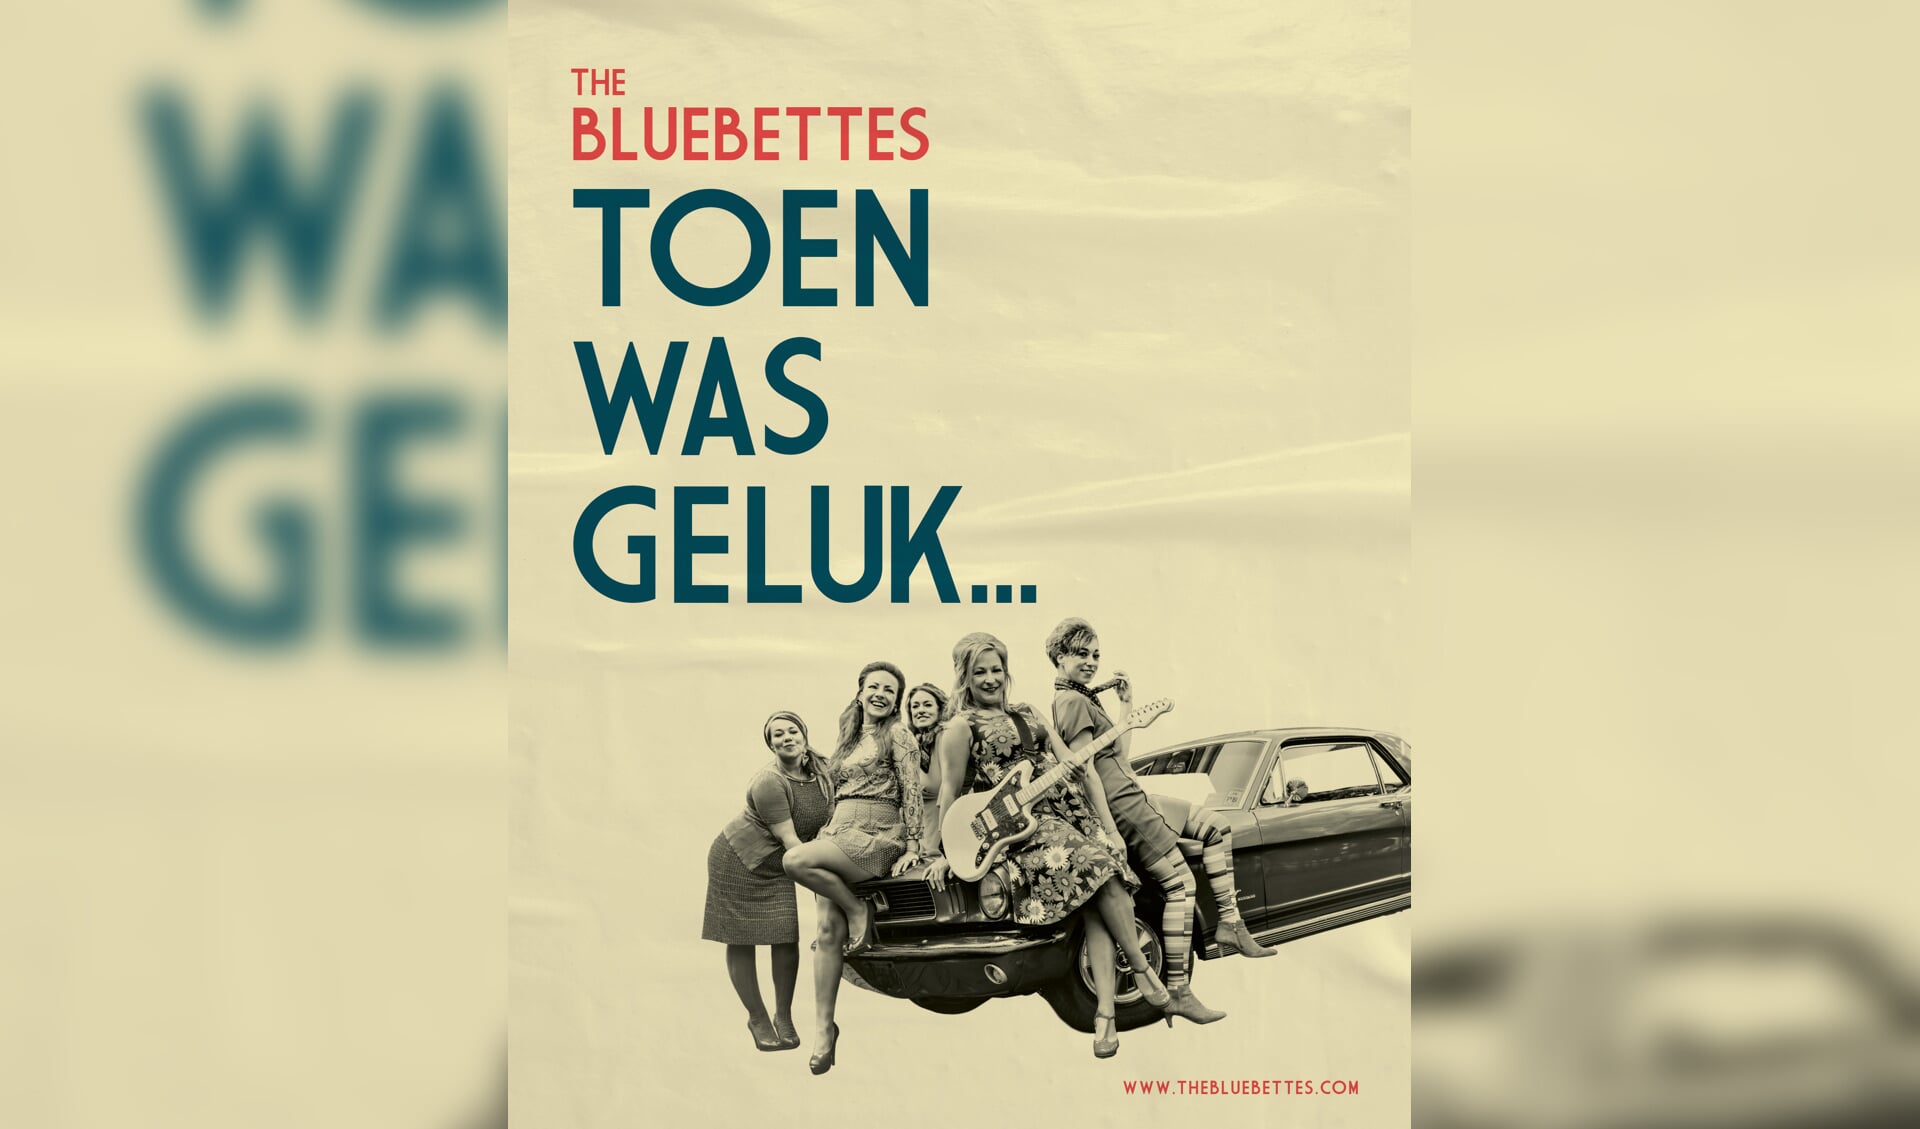 The Bluebettes.